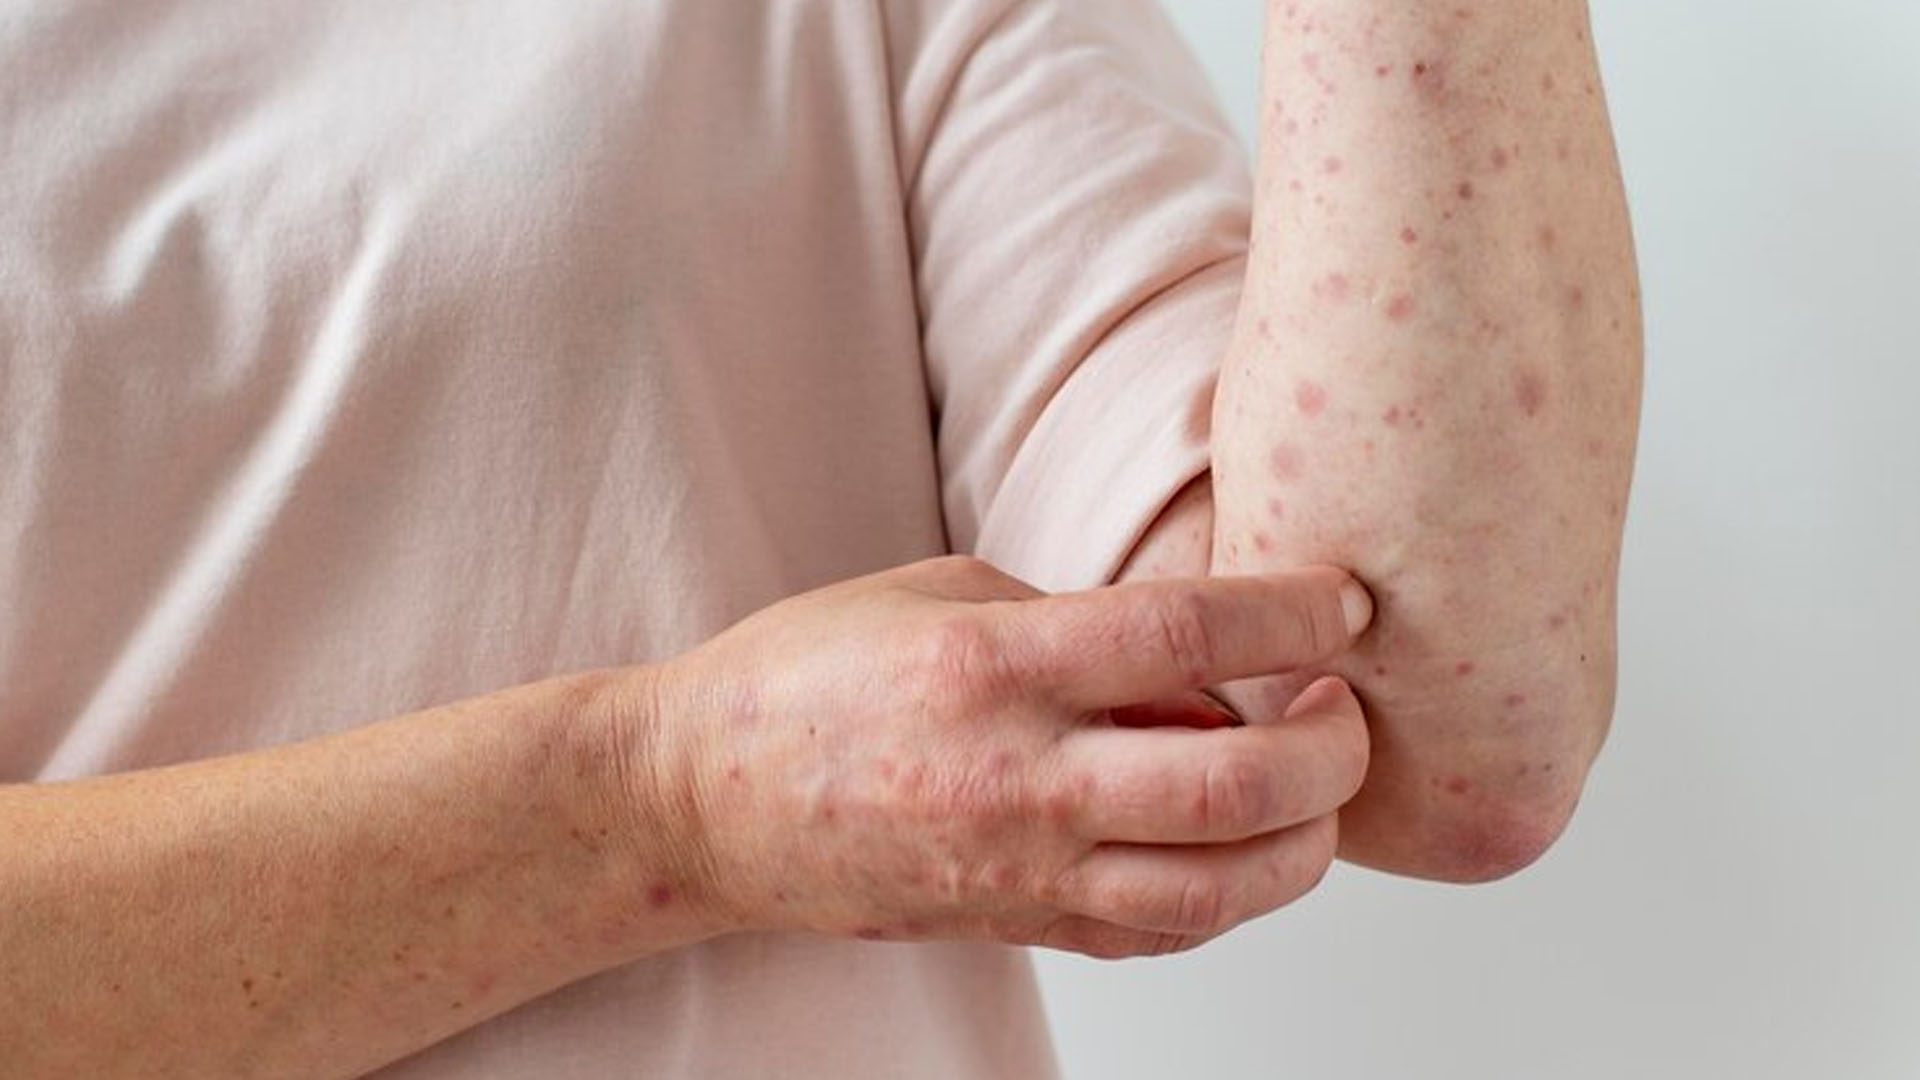 What are the Home Remedies for Measles?